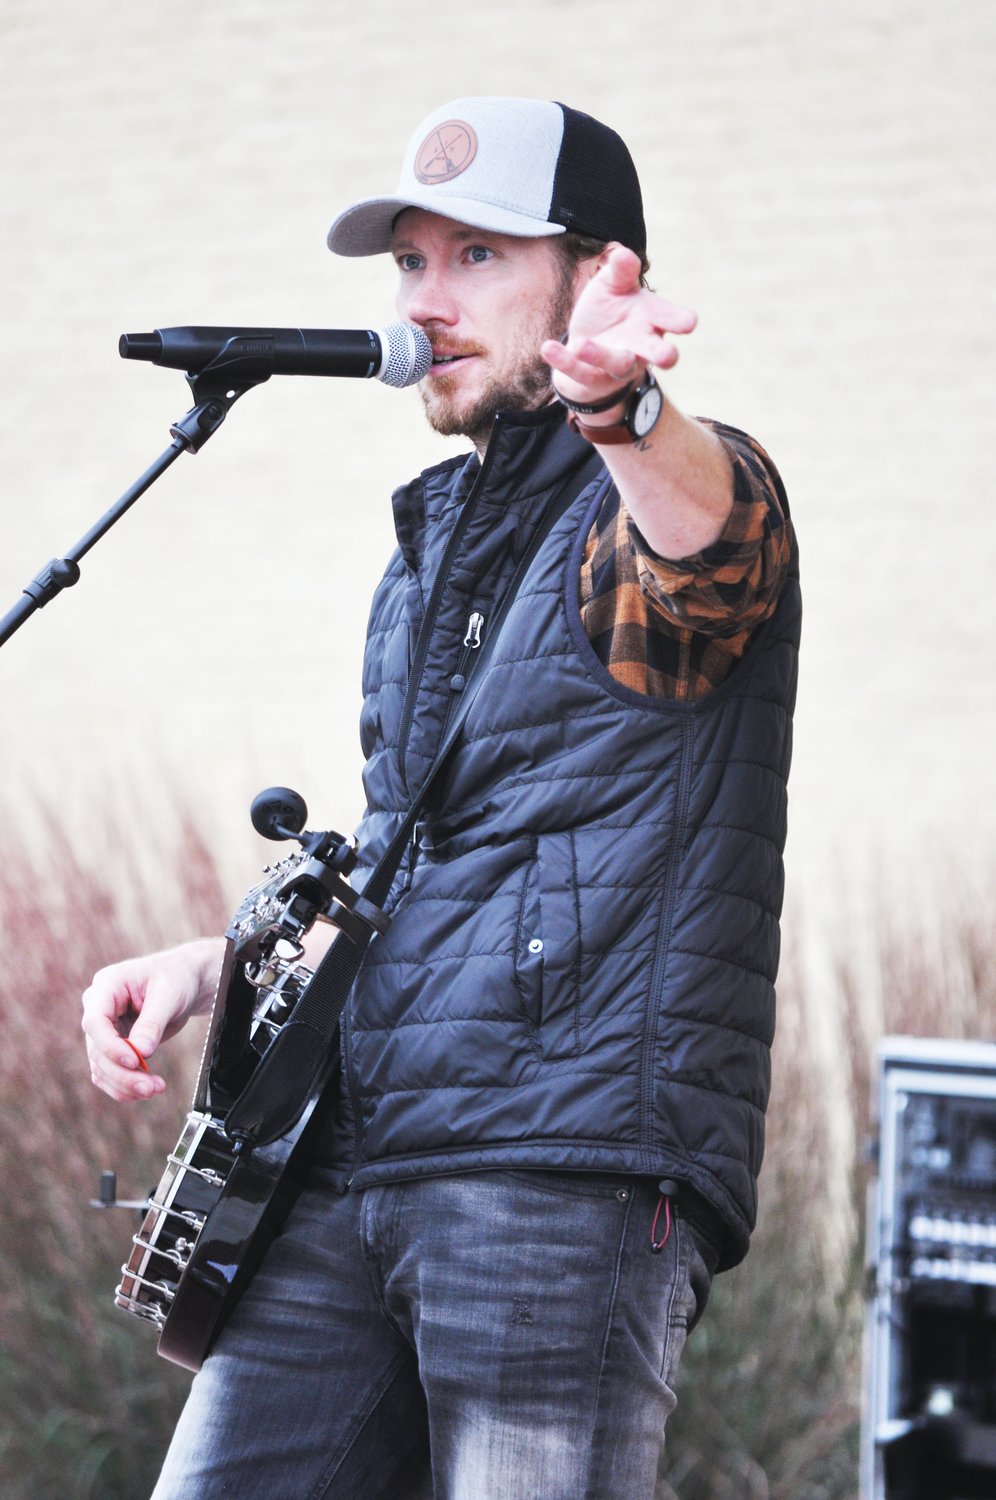 Singer Jerod Bolt talks in between songs during a performance at the Crawfordsville Farmers' Market Saturday. Bolt is a Southern Christian rock artist from northern Indiana.